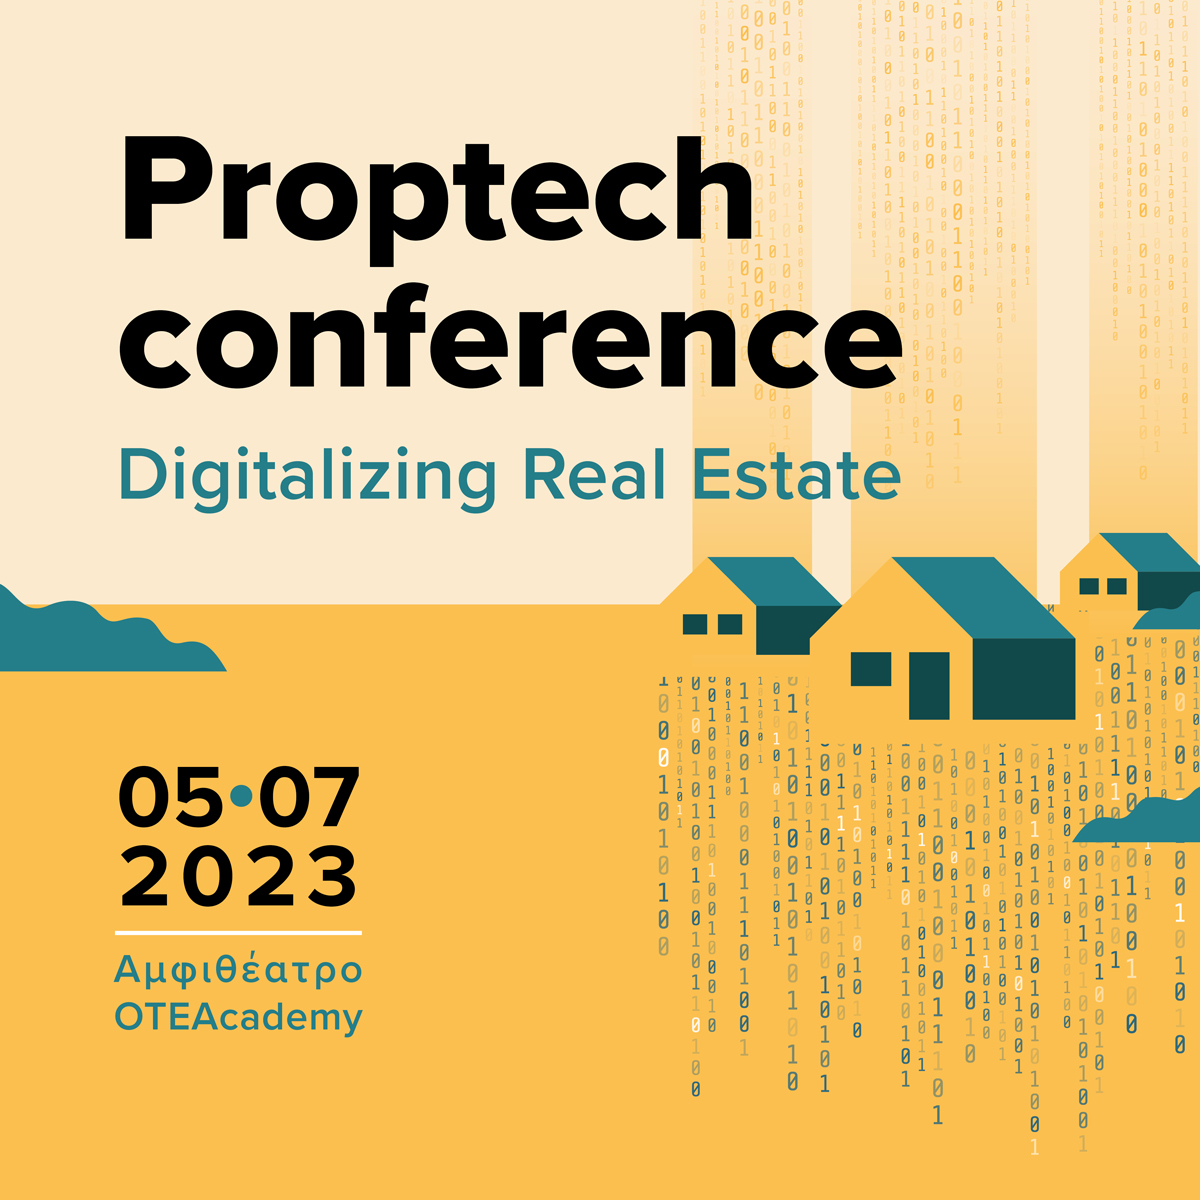 Archisearch Συνέδριο Proptech-Digitalizing Real Estate_OTEAcademy - 05.07.23 | Boussias events